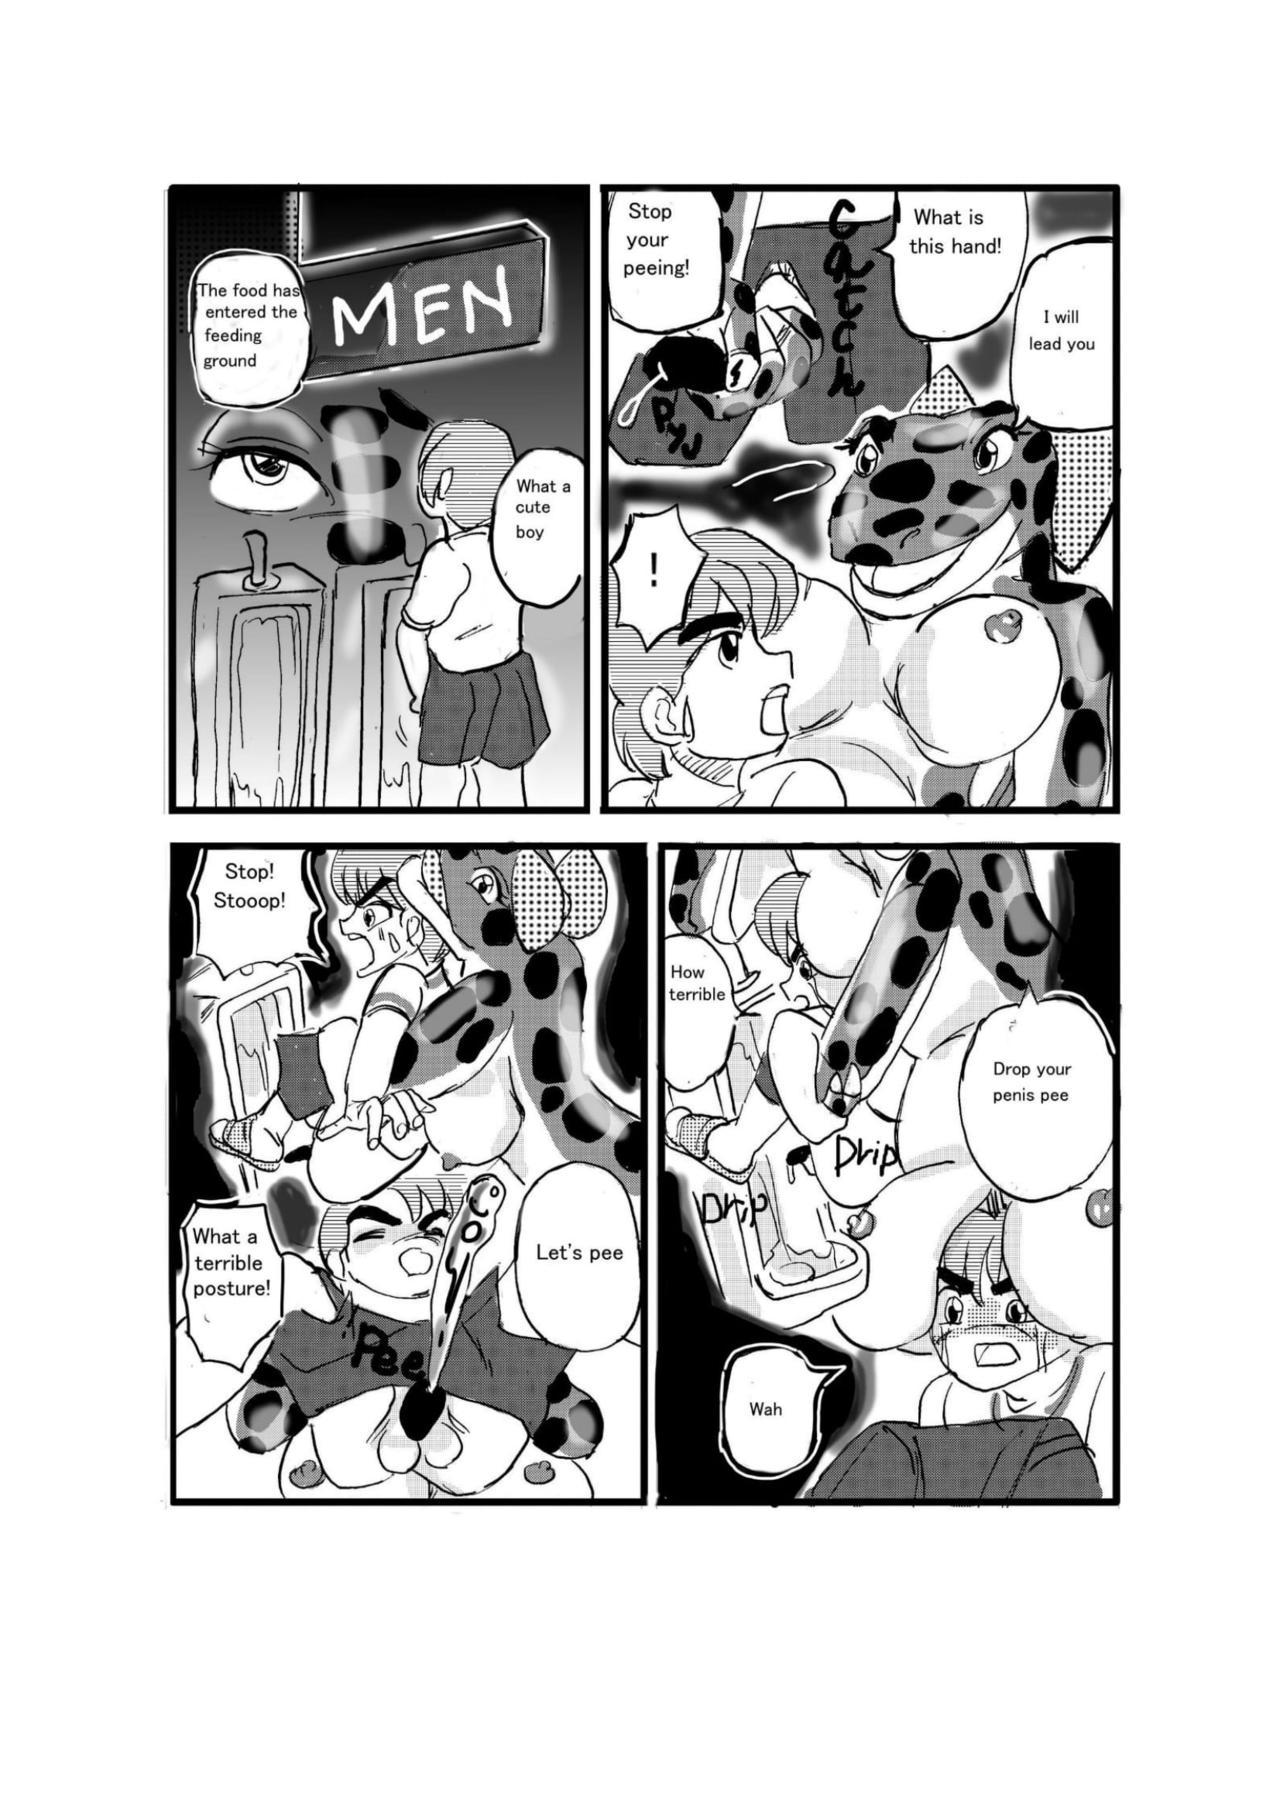 Best Blow Job Swallowed Whole vol.2 Waniko + What's Digestion? - Original Dominate - Page 3